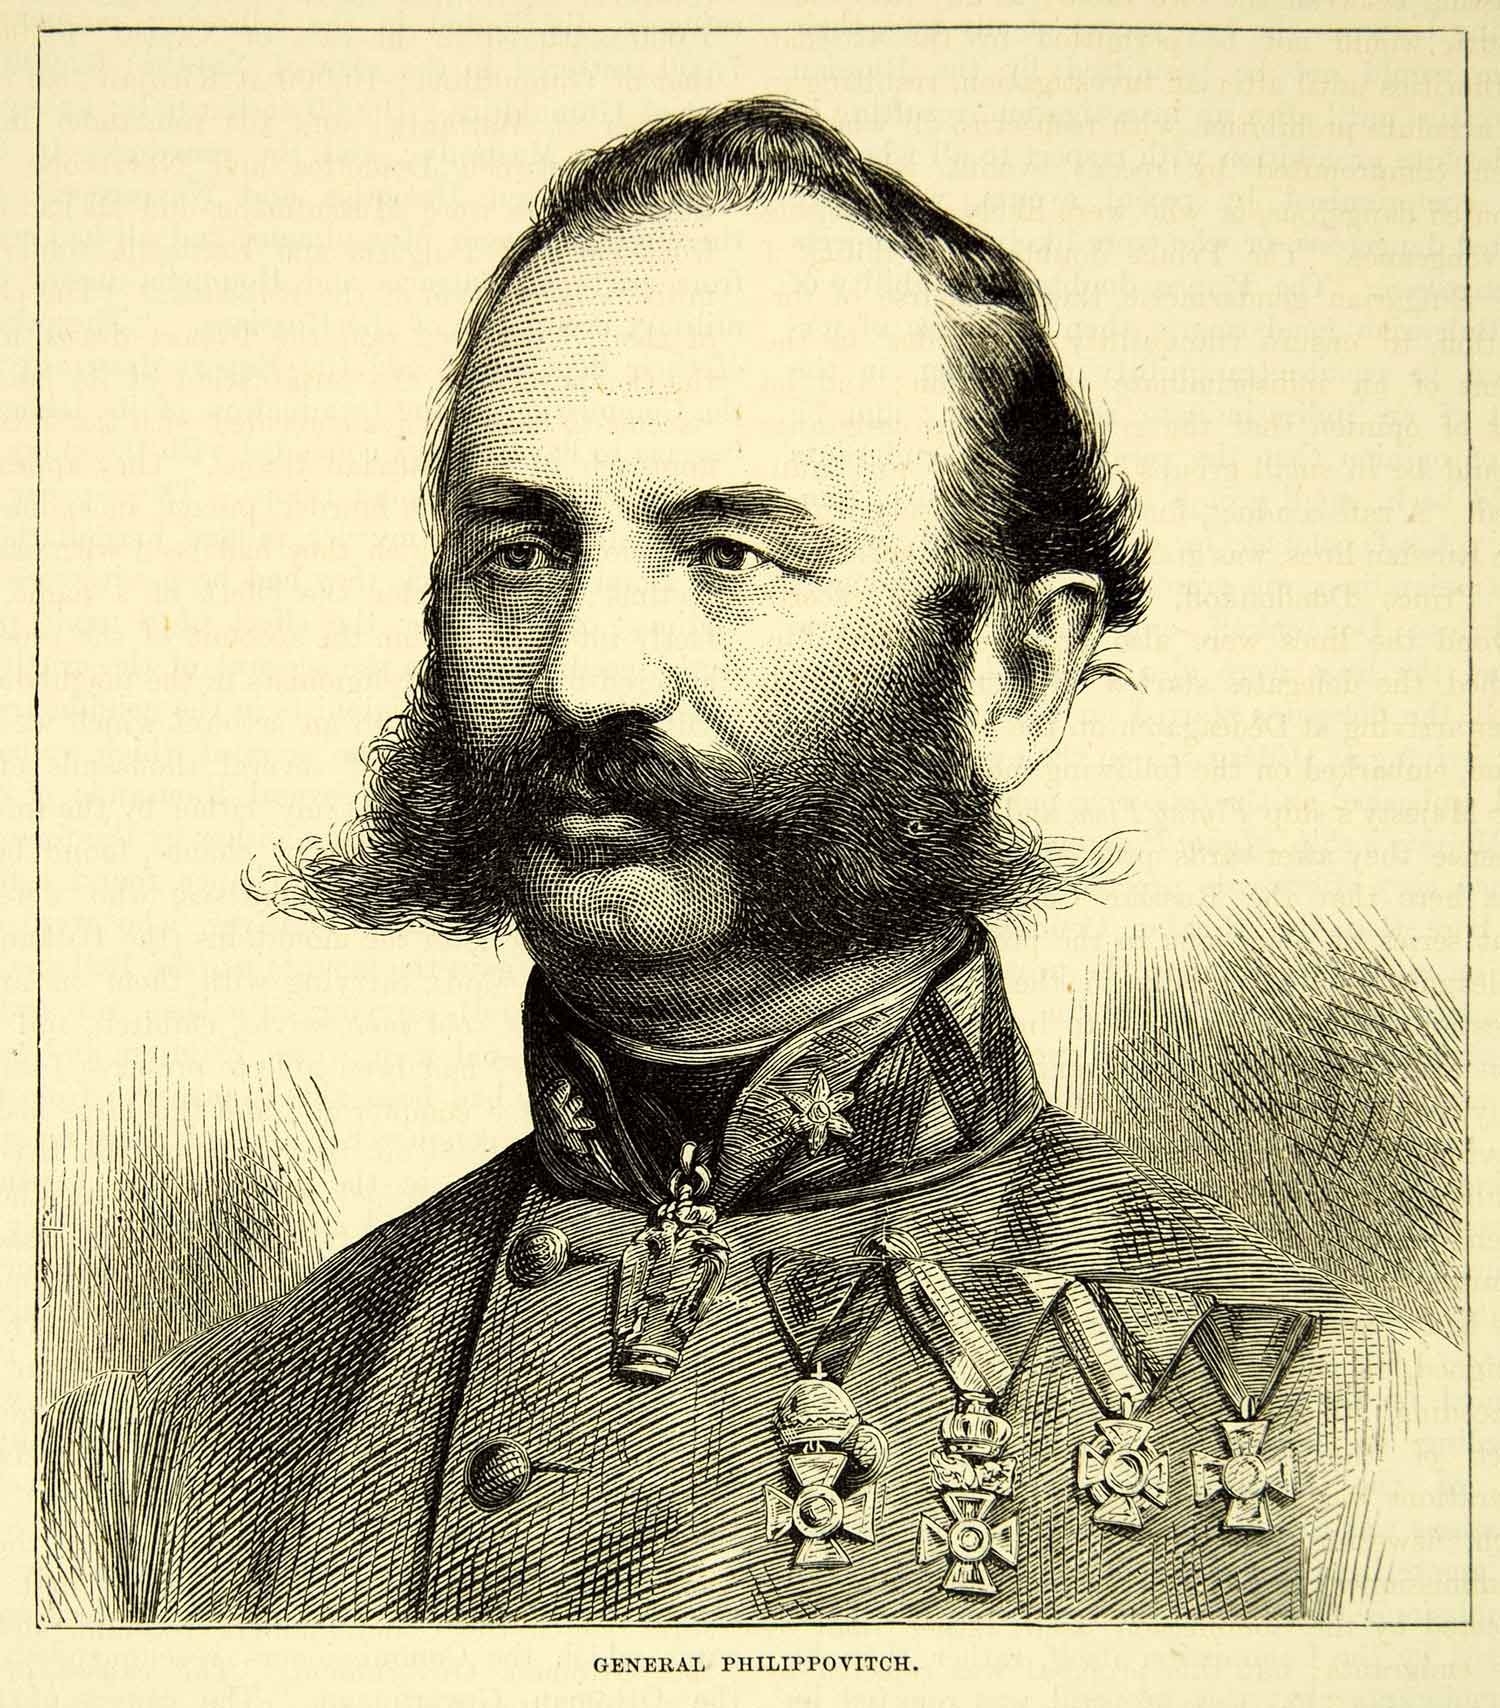 1883 Wood Engraving Military Honors Portrait General Philippovitch Medal XEGA3